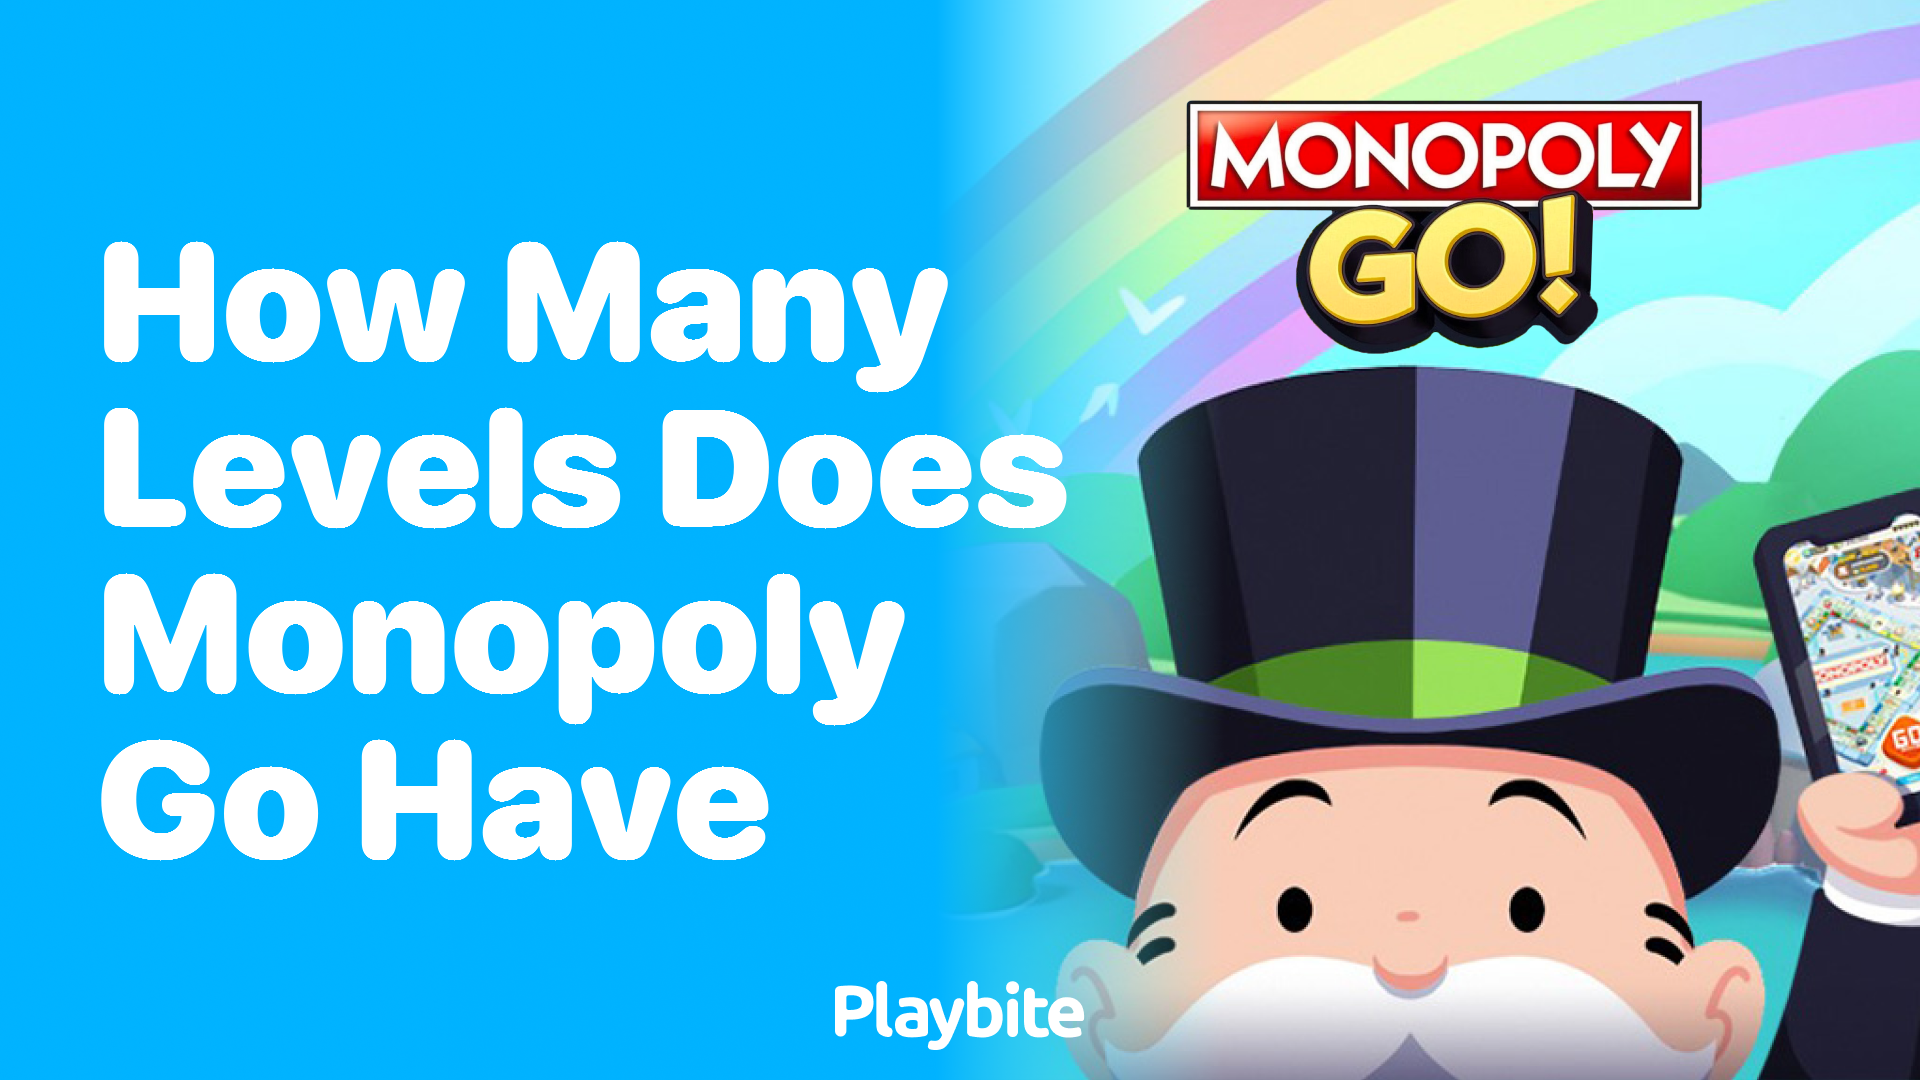 How Many Levels Does Monopoly Go Have?